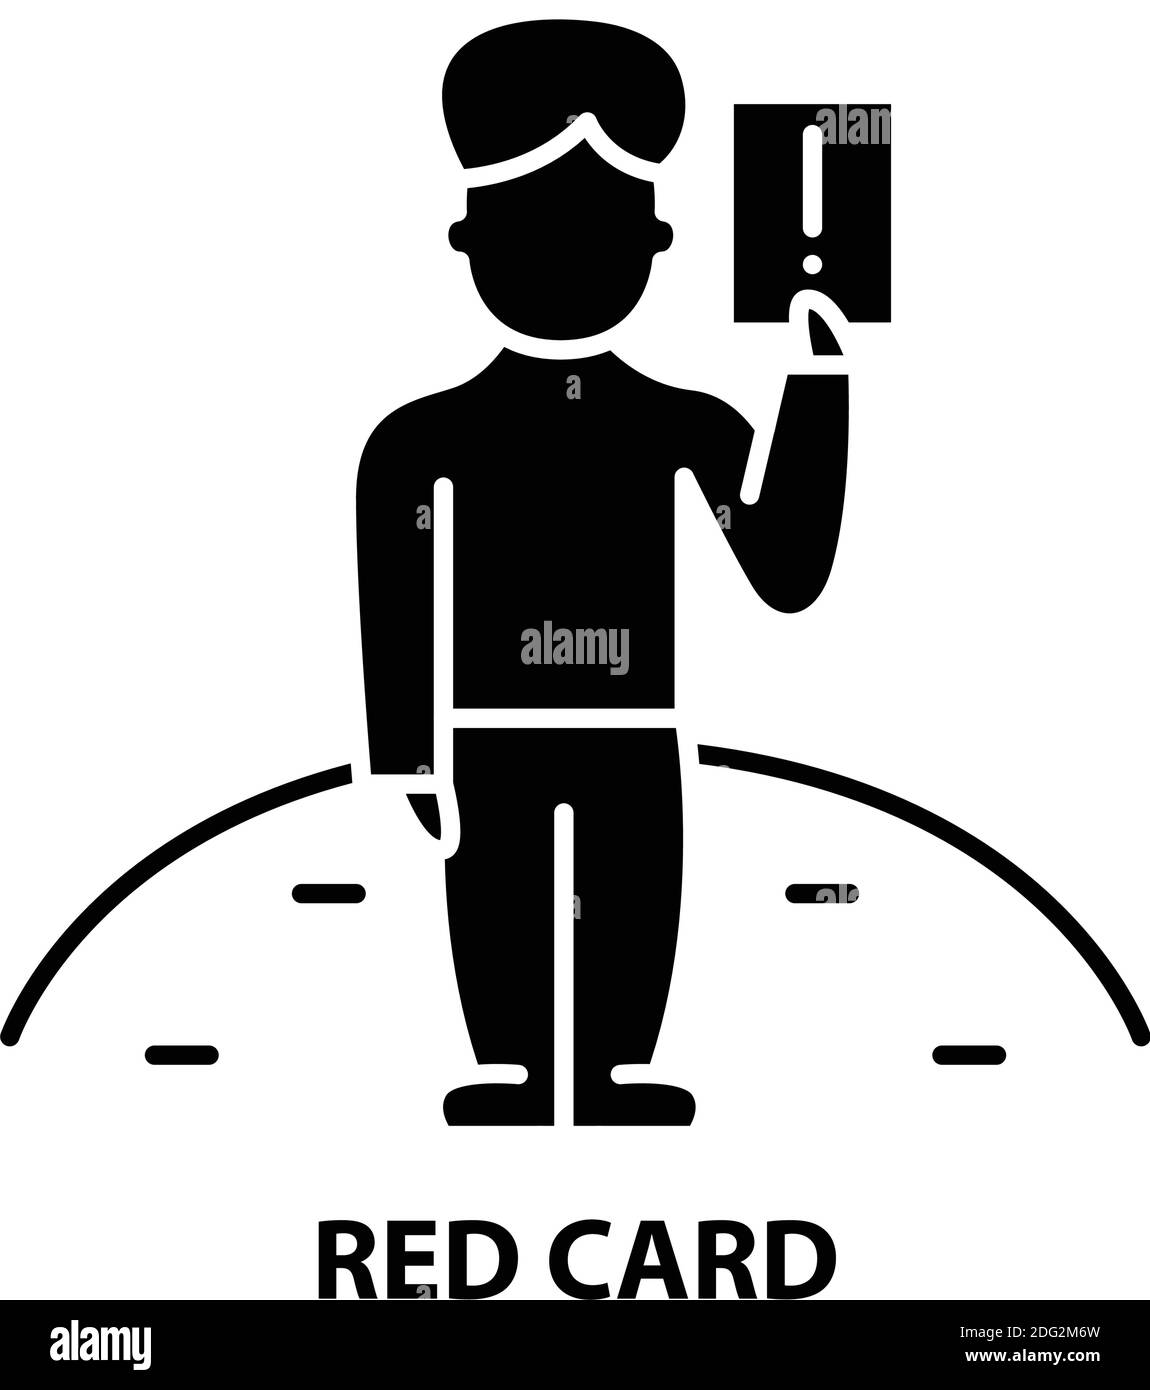 Black Red Card: Over 258,221 Royalty-Free Licensable Stock Photos